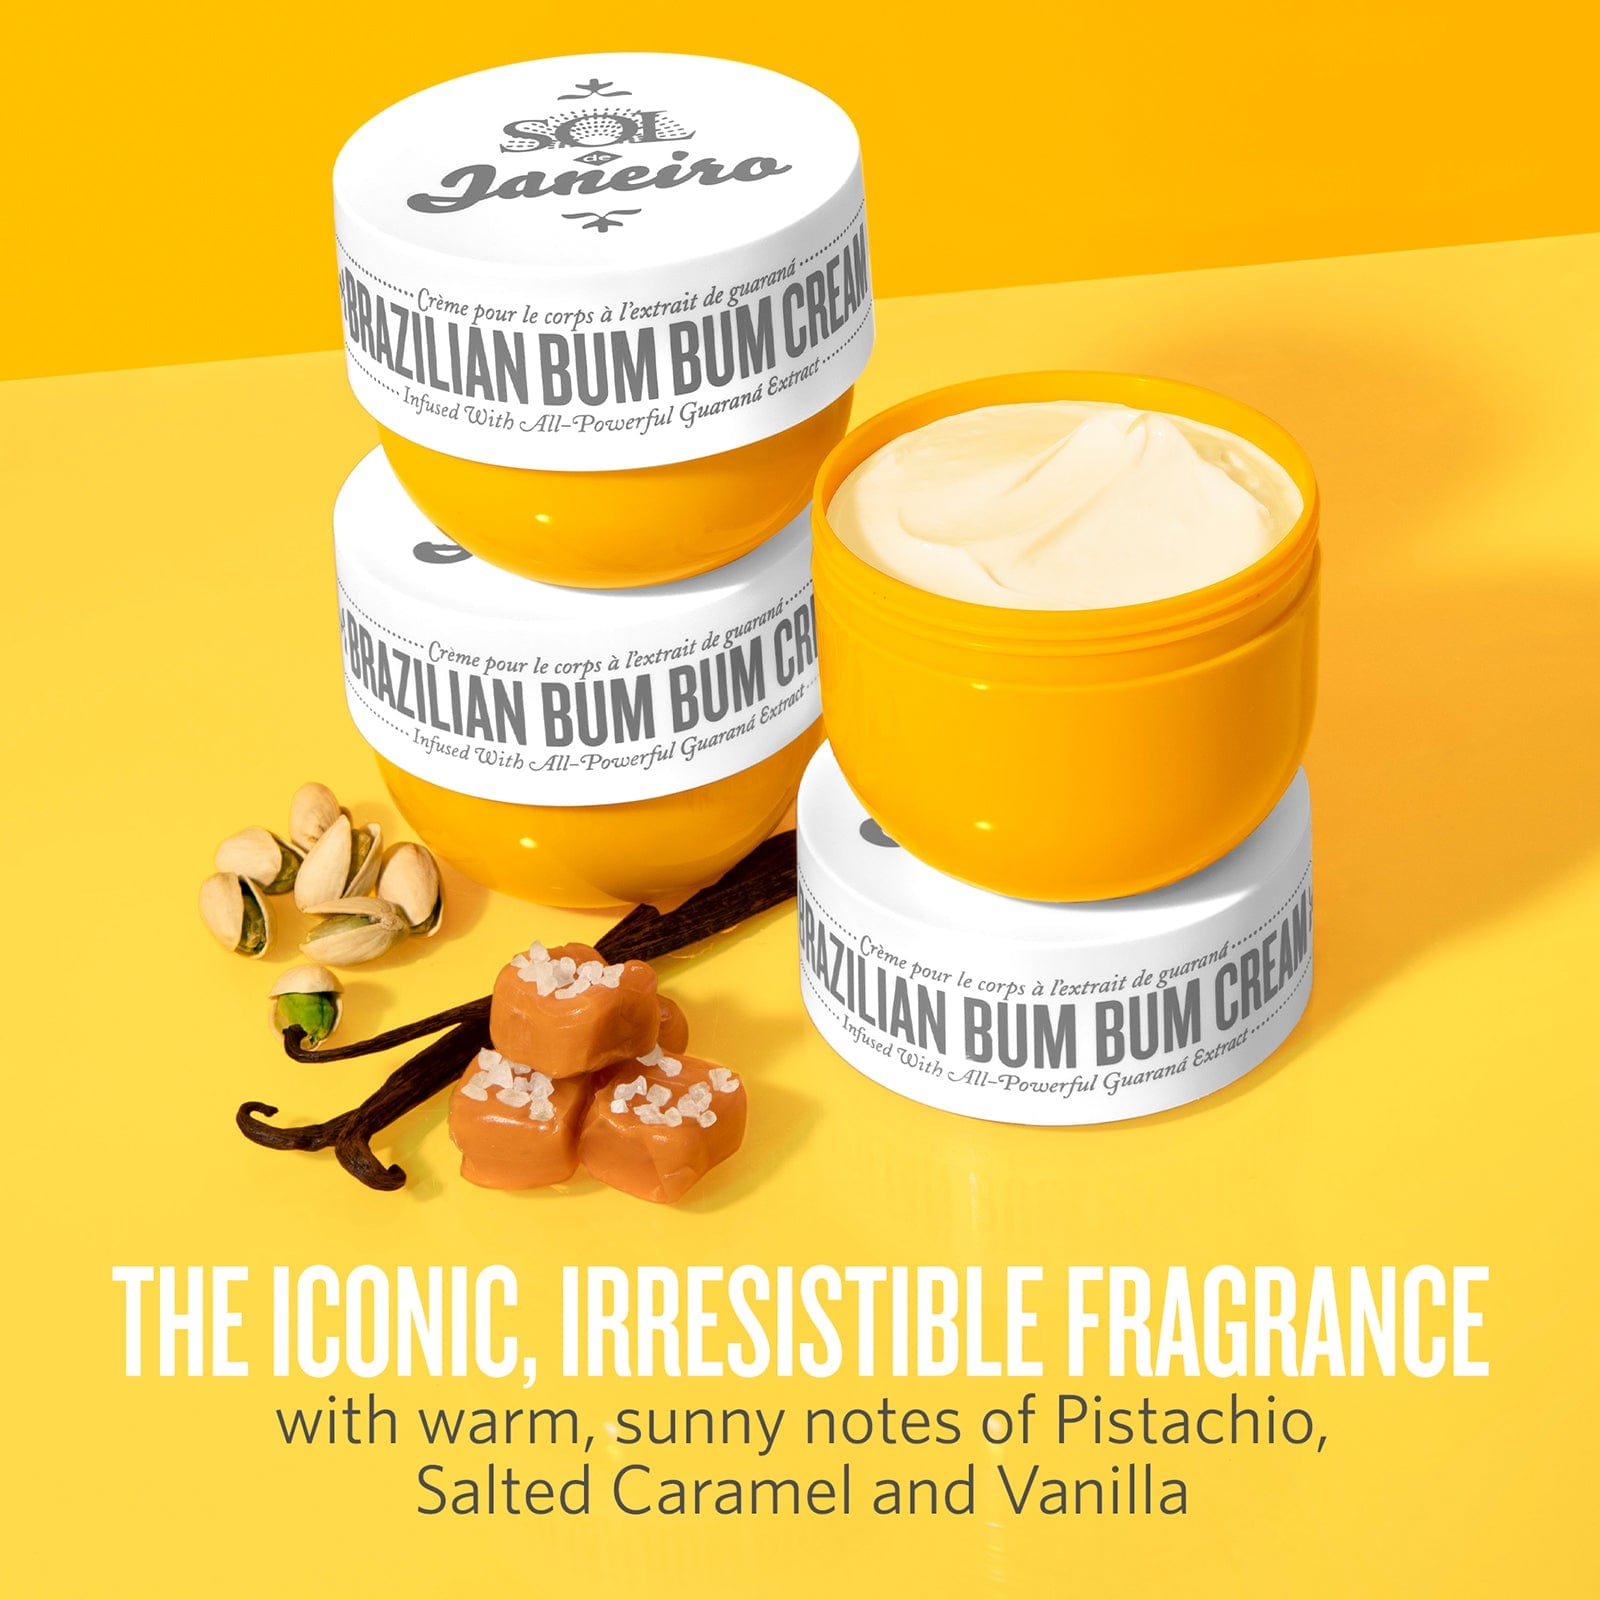 The Iconic, Irresistible Fragrance with warm, sunny notes of Pistachio, Salted Caramel, and Vanilla